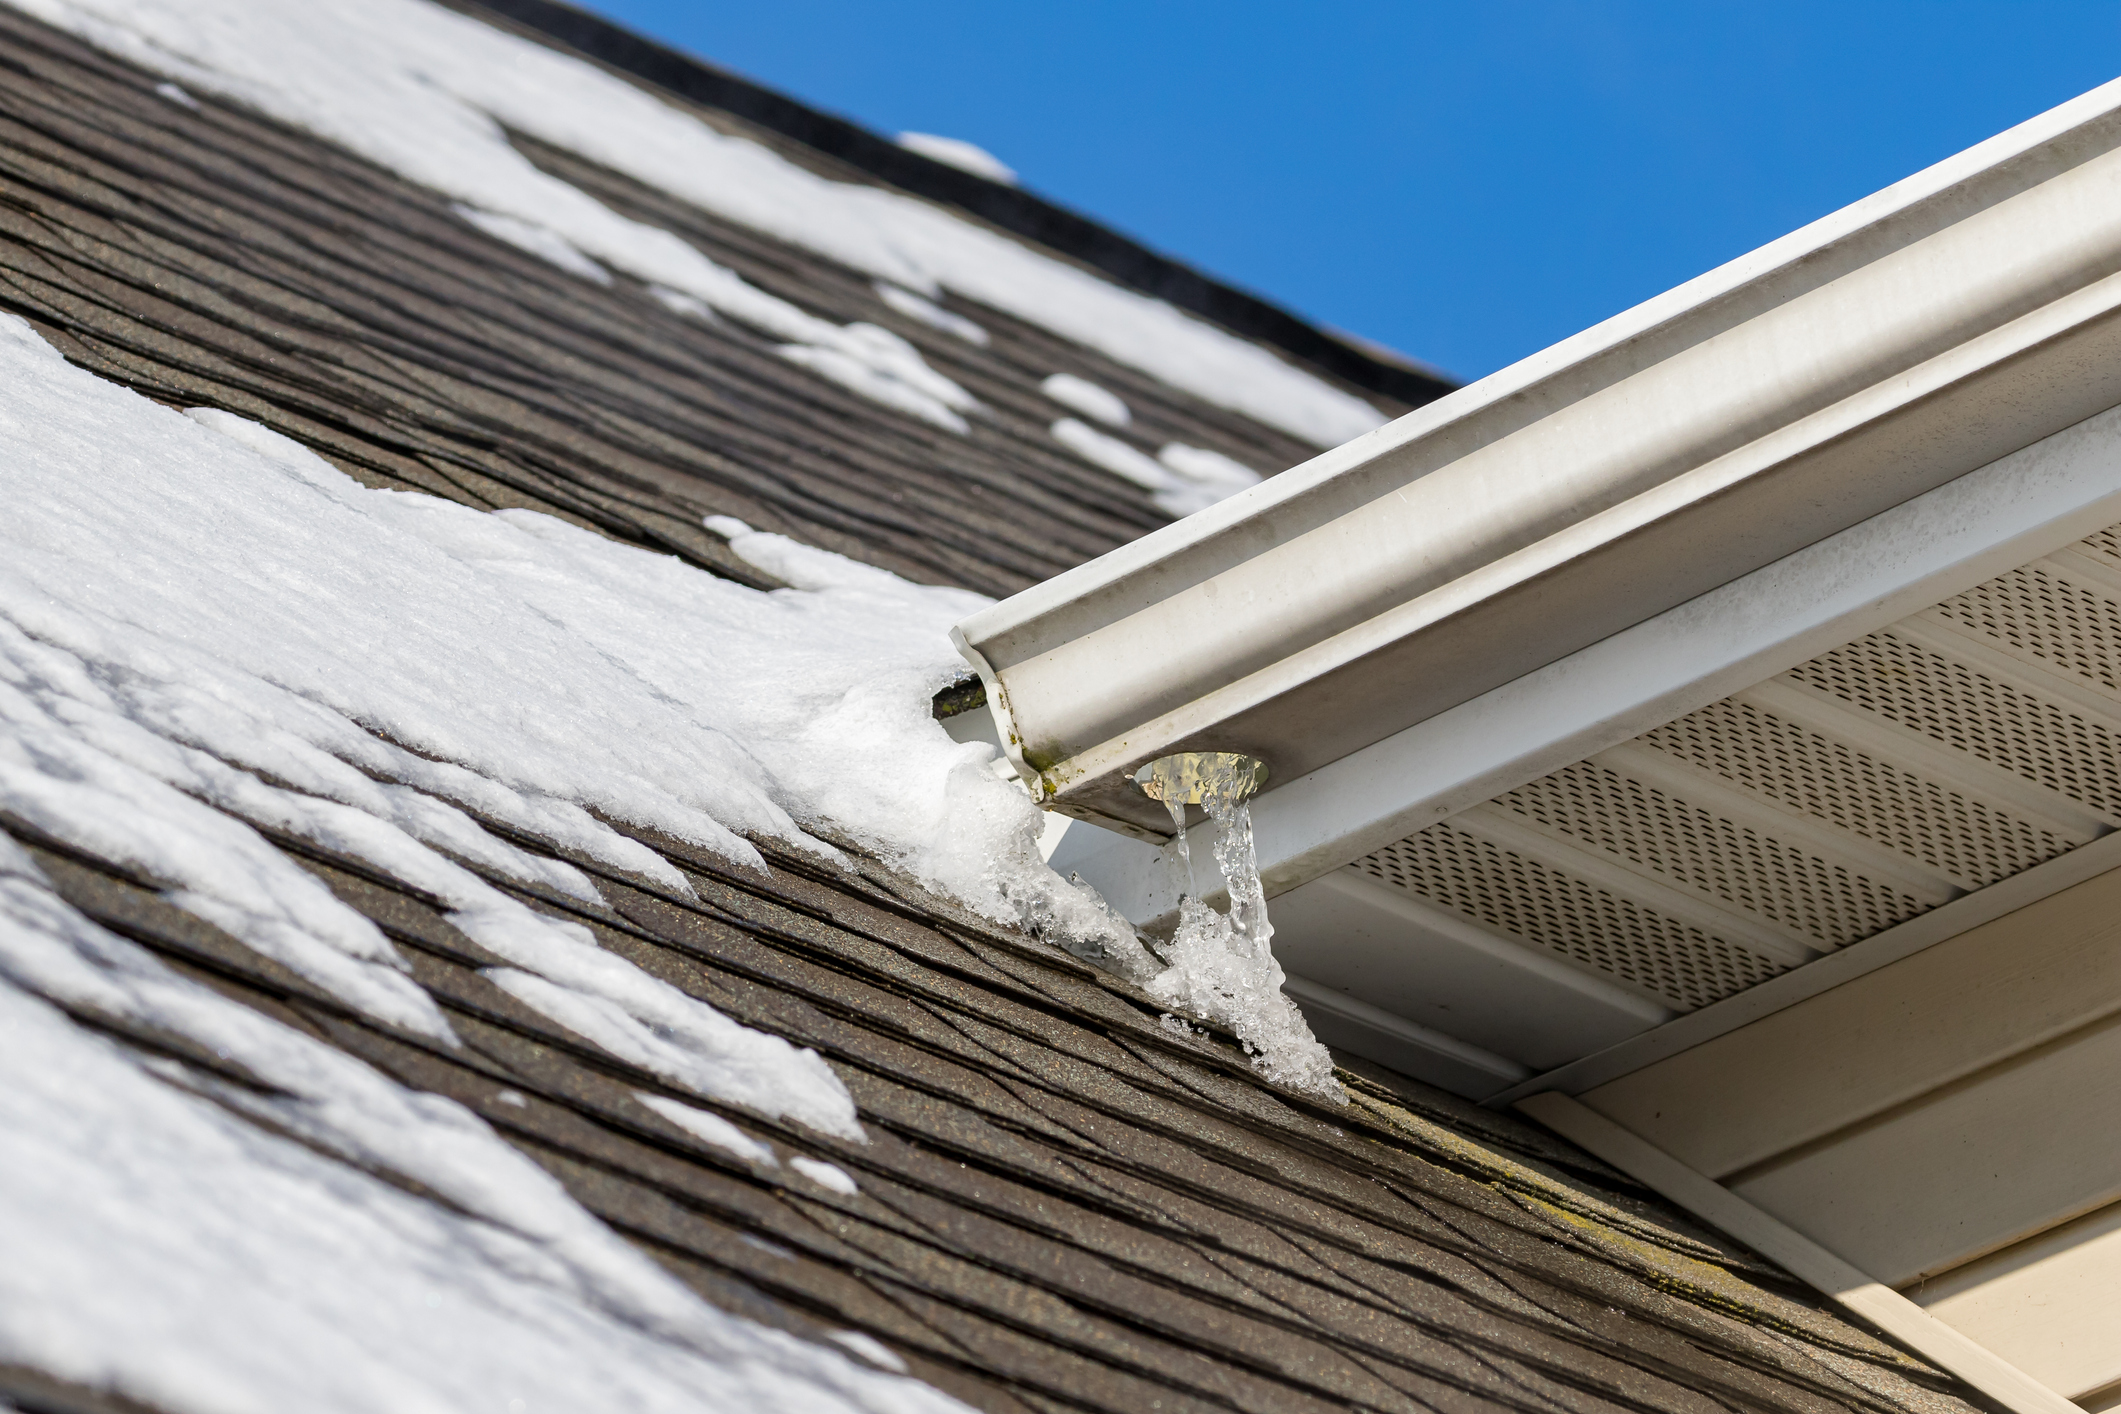 Does a dark roof make a house warmer in the winter?